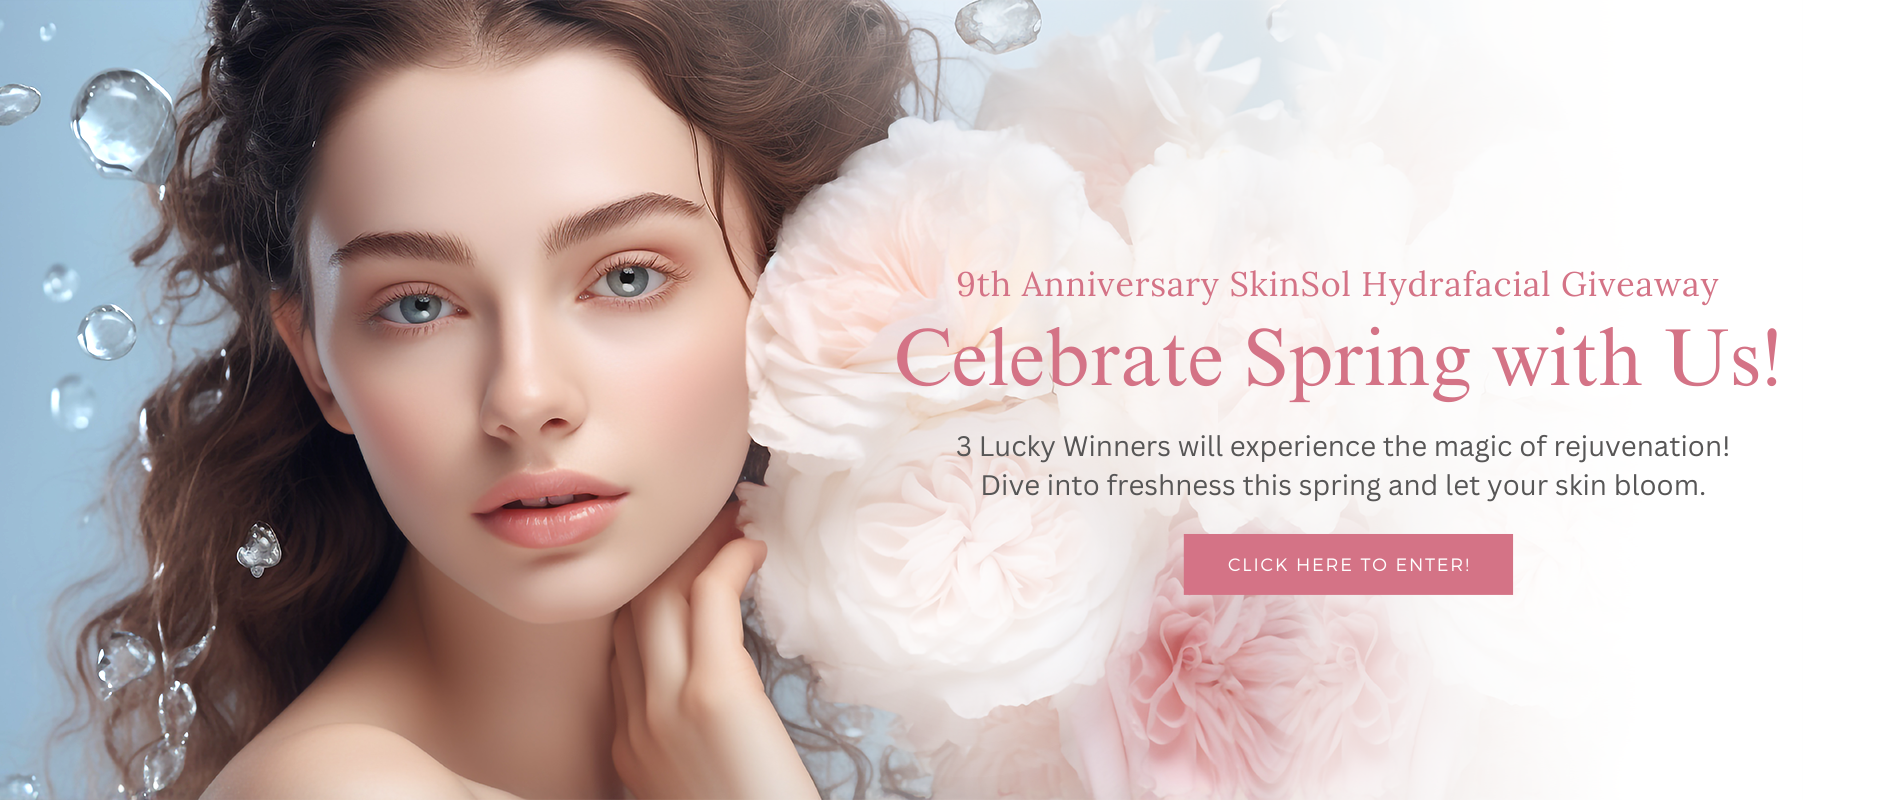 Spring into radiance experience the jamie dual facial laser special 2 e0bd7d51 6be3 4117 b6a0 ee2a4bcdf8f6